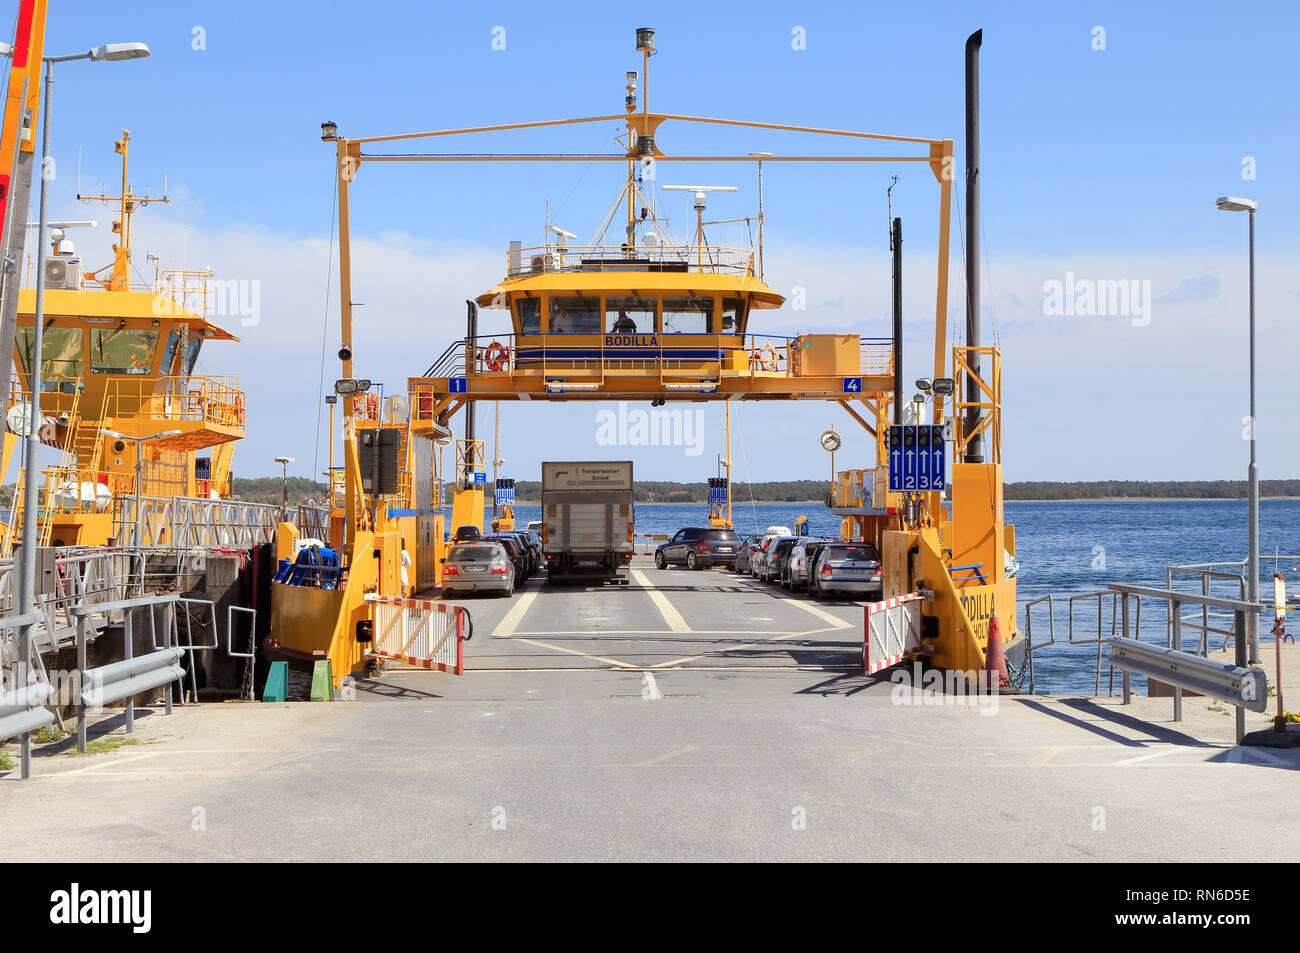 Farosund, Sweden - May 13, 2016: Public road-ferry at the berth in Farosund connecting the two islands Faro and Gotland. Stock Photo